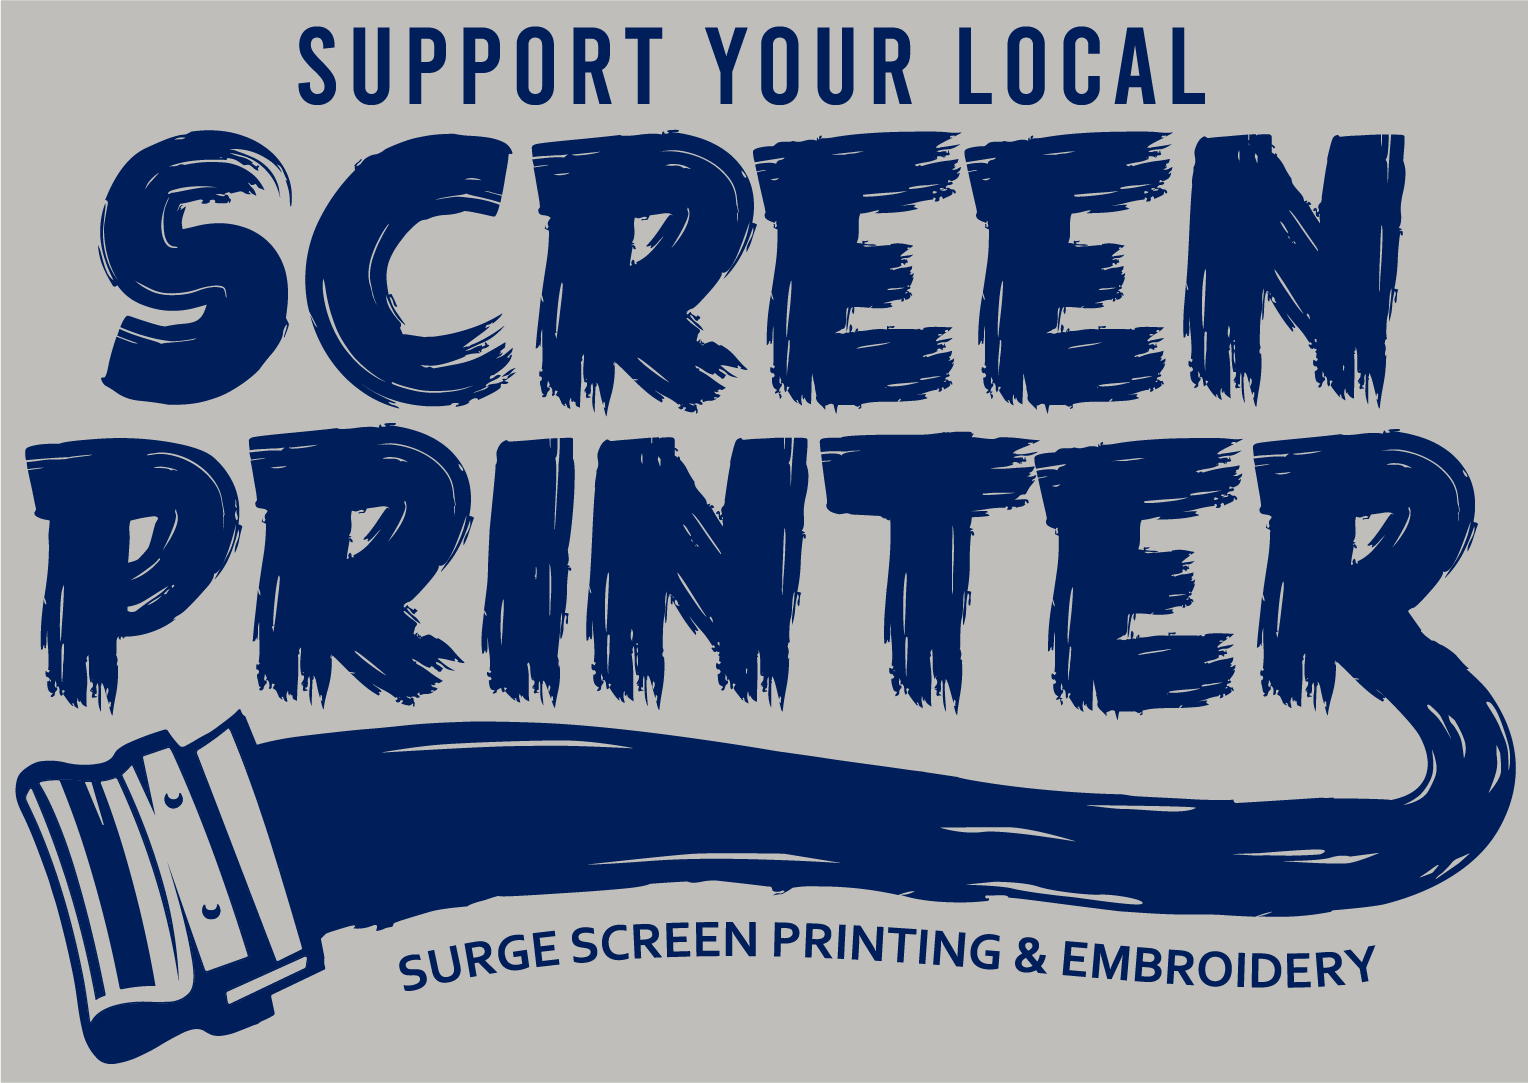 10 Reasons to Support Your Local Screen Printer